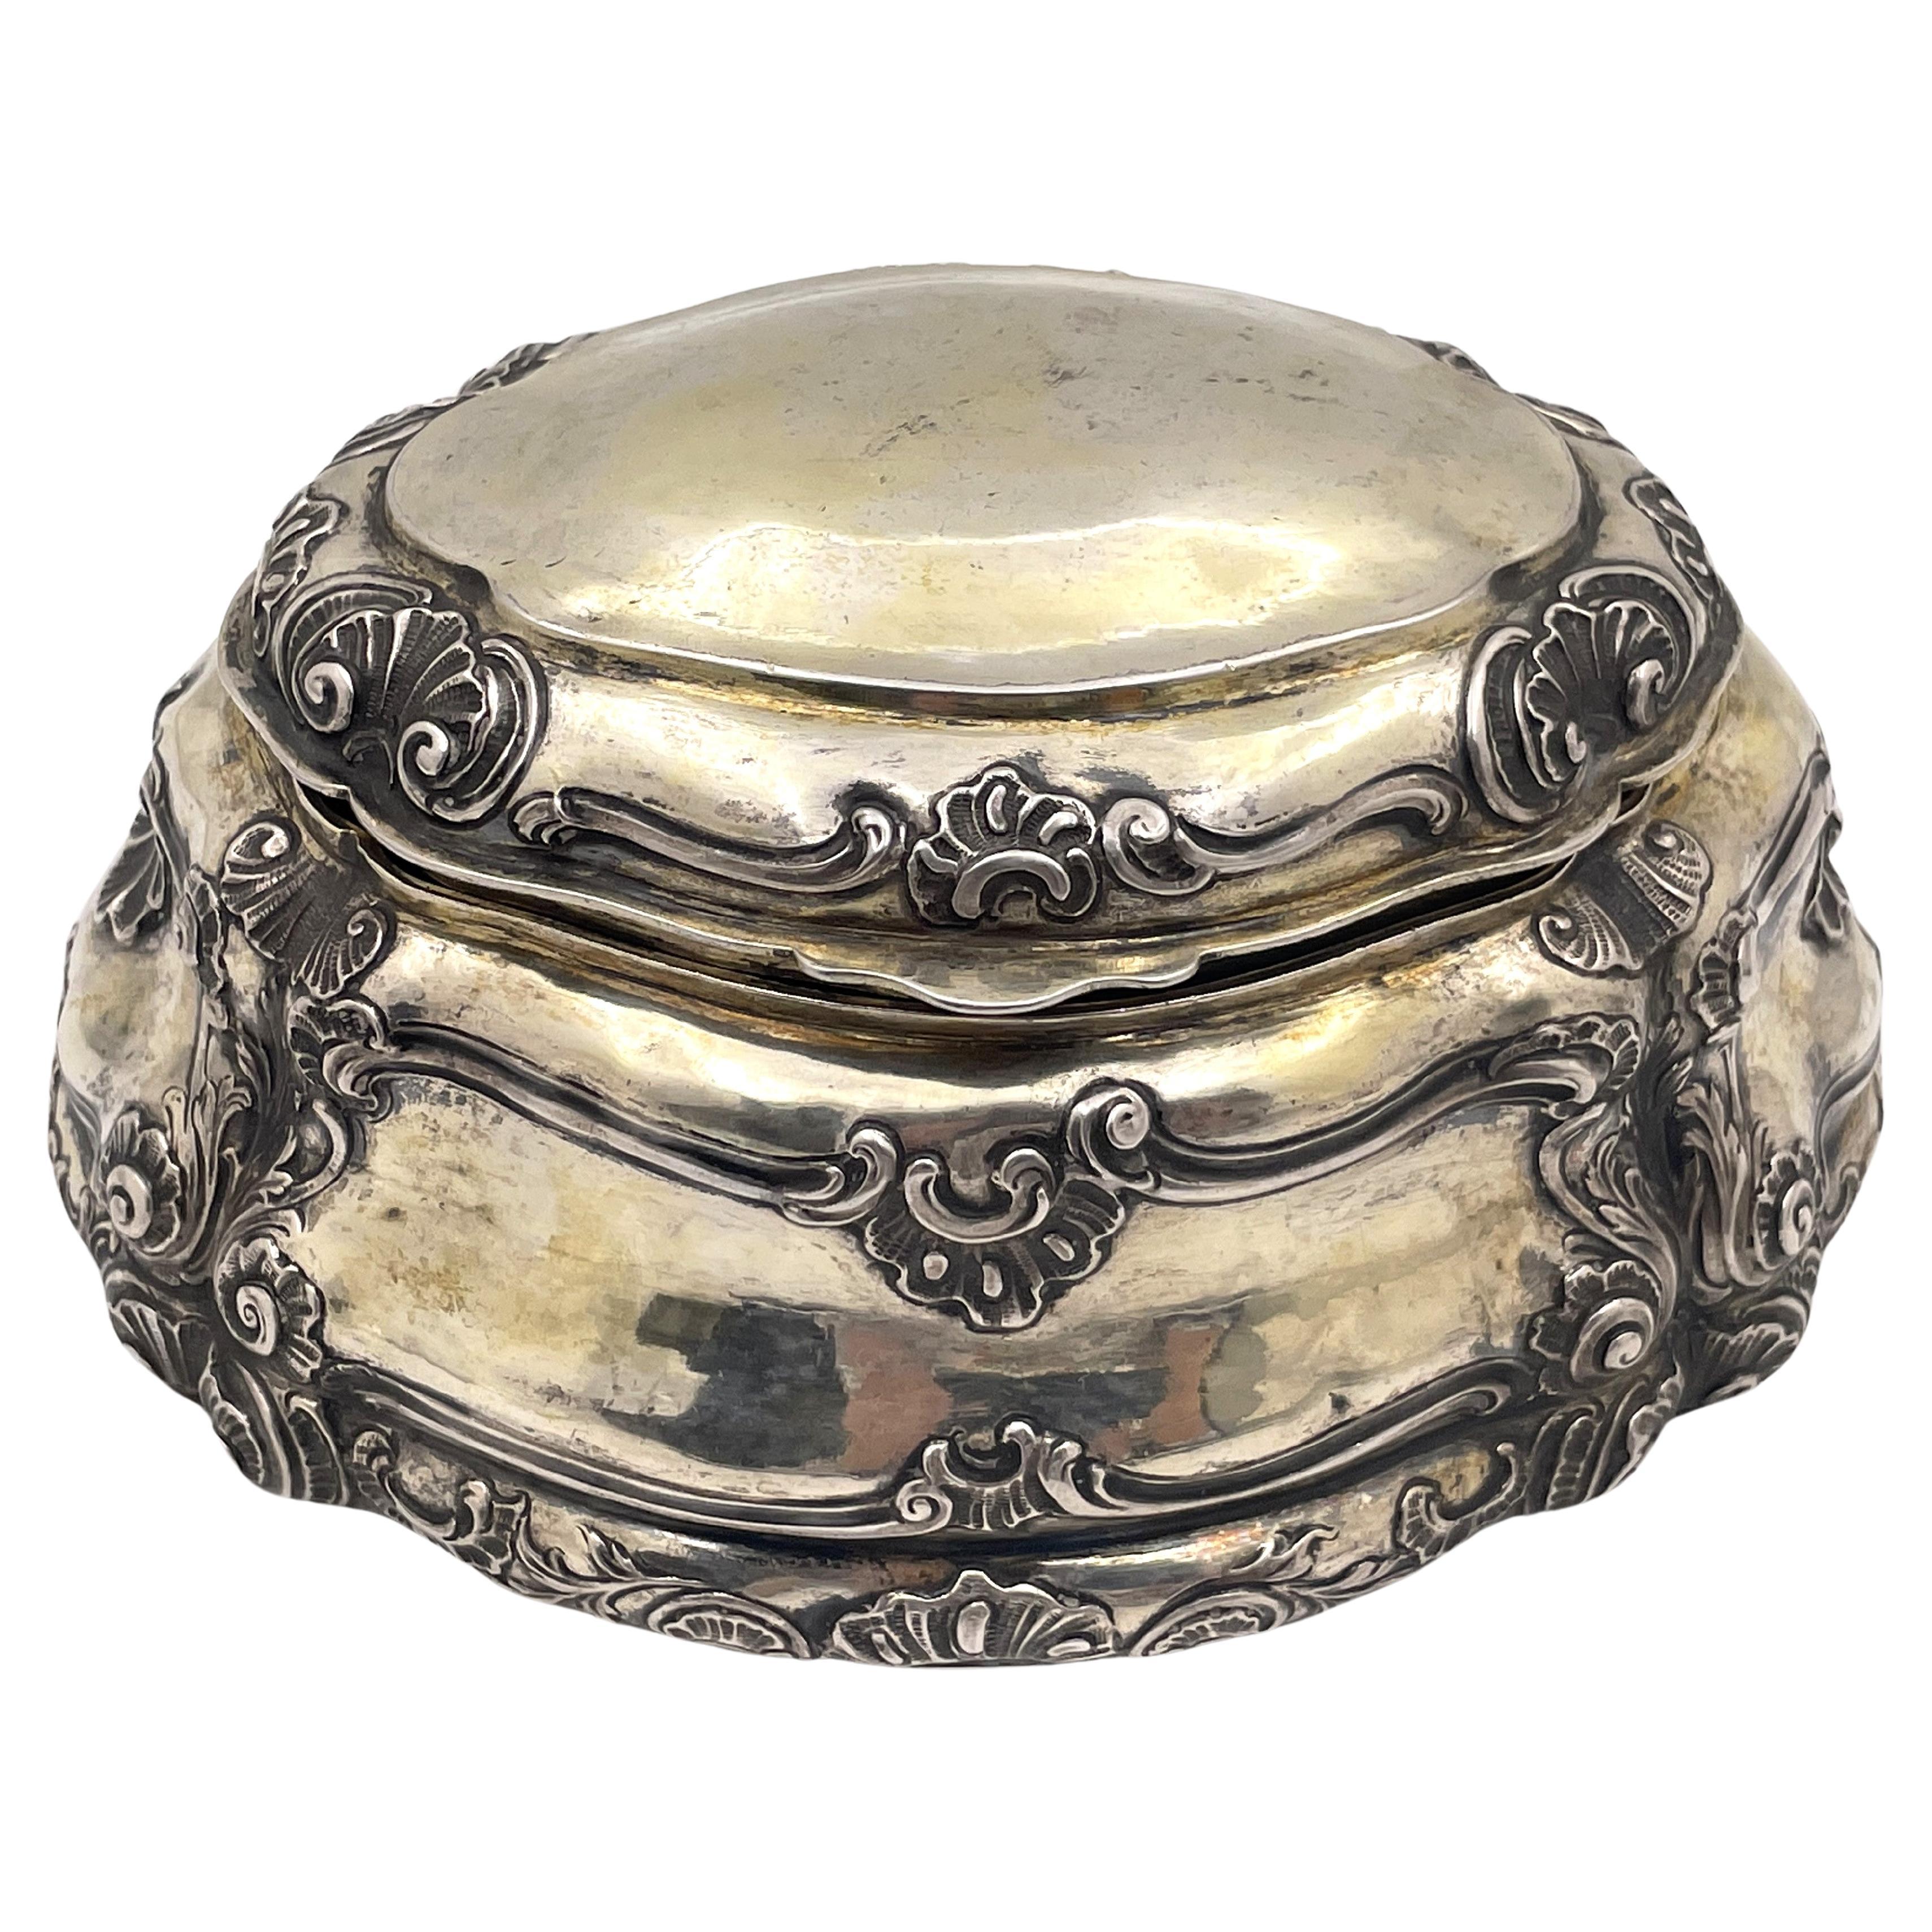 Austrian 18th or Early 19th Century Gilt Silver Box with Shell Motifs